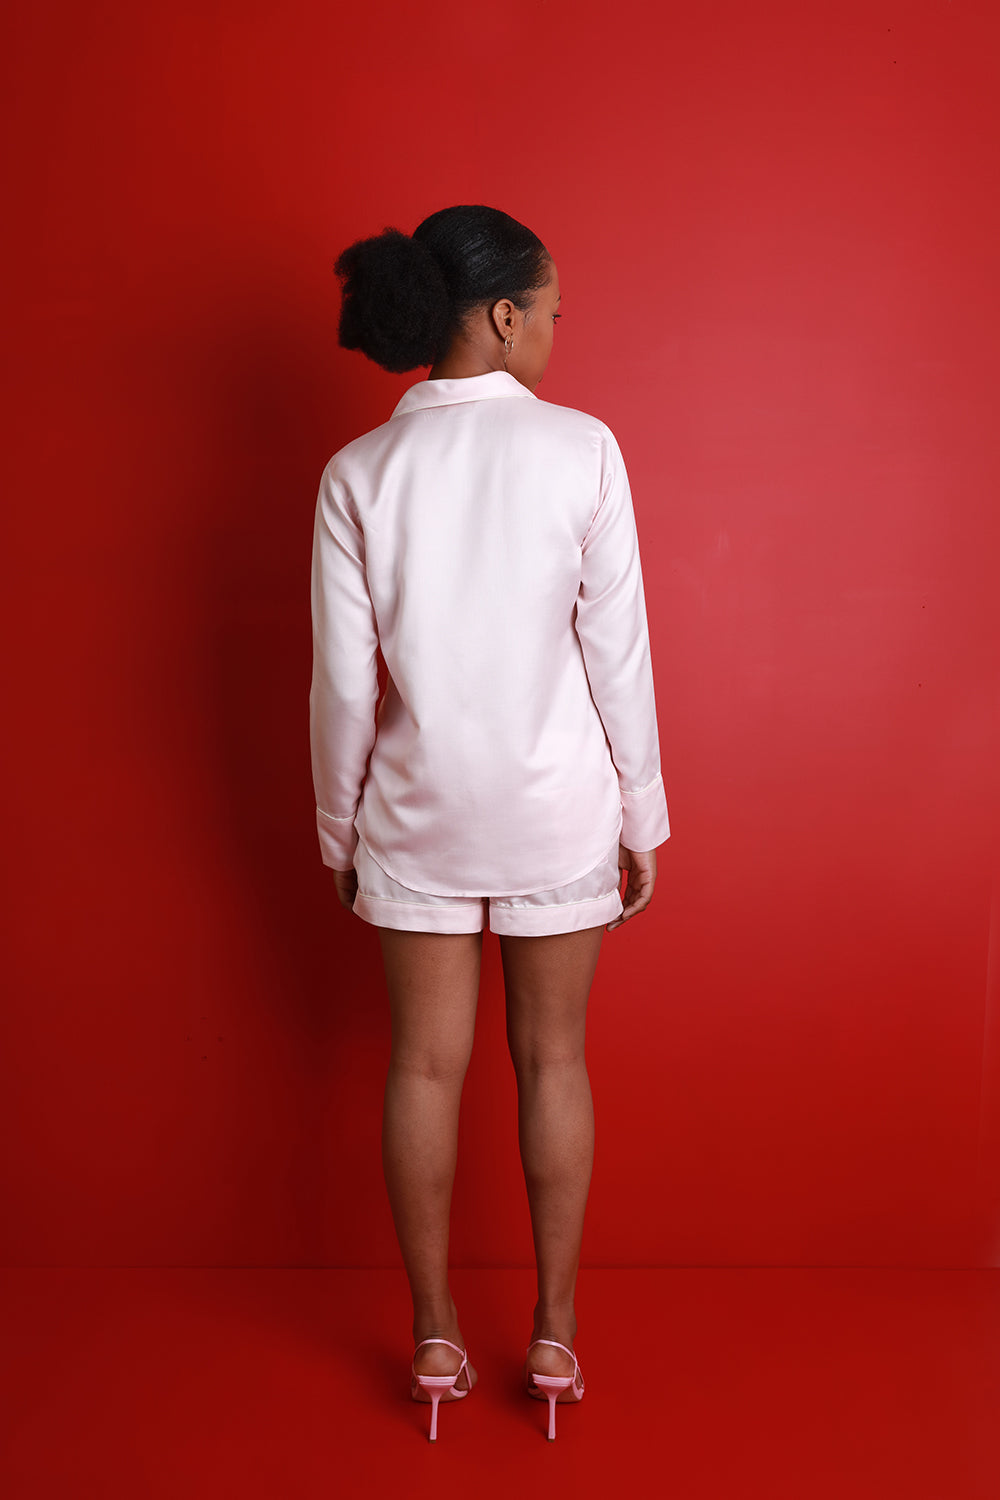 Mulberry Silk Long Sleeved Shorties Pyjamas - Chennai Pink. Please note that pieces purchased in our Archive Sale can't be refunded. We are happy to offer you an exchange, if we have the stock available or a credit note.